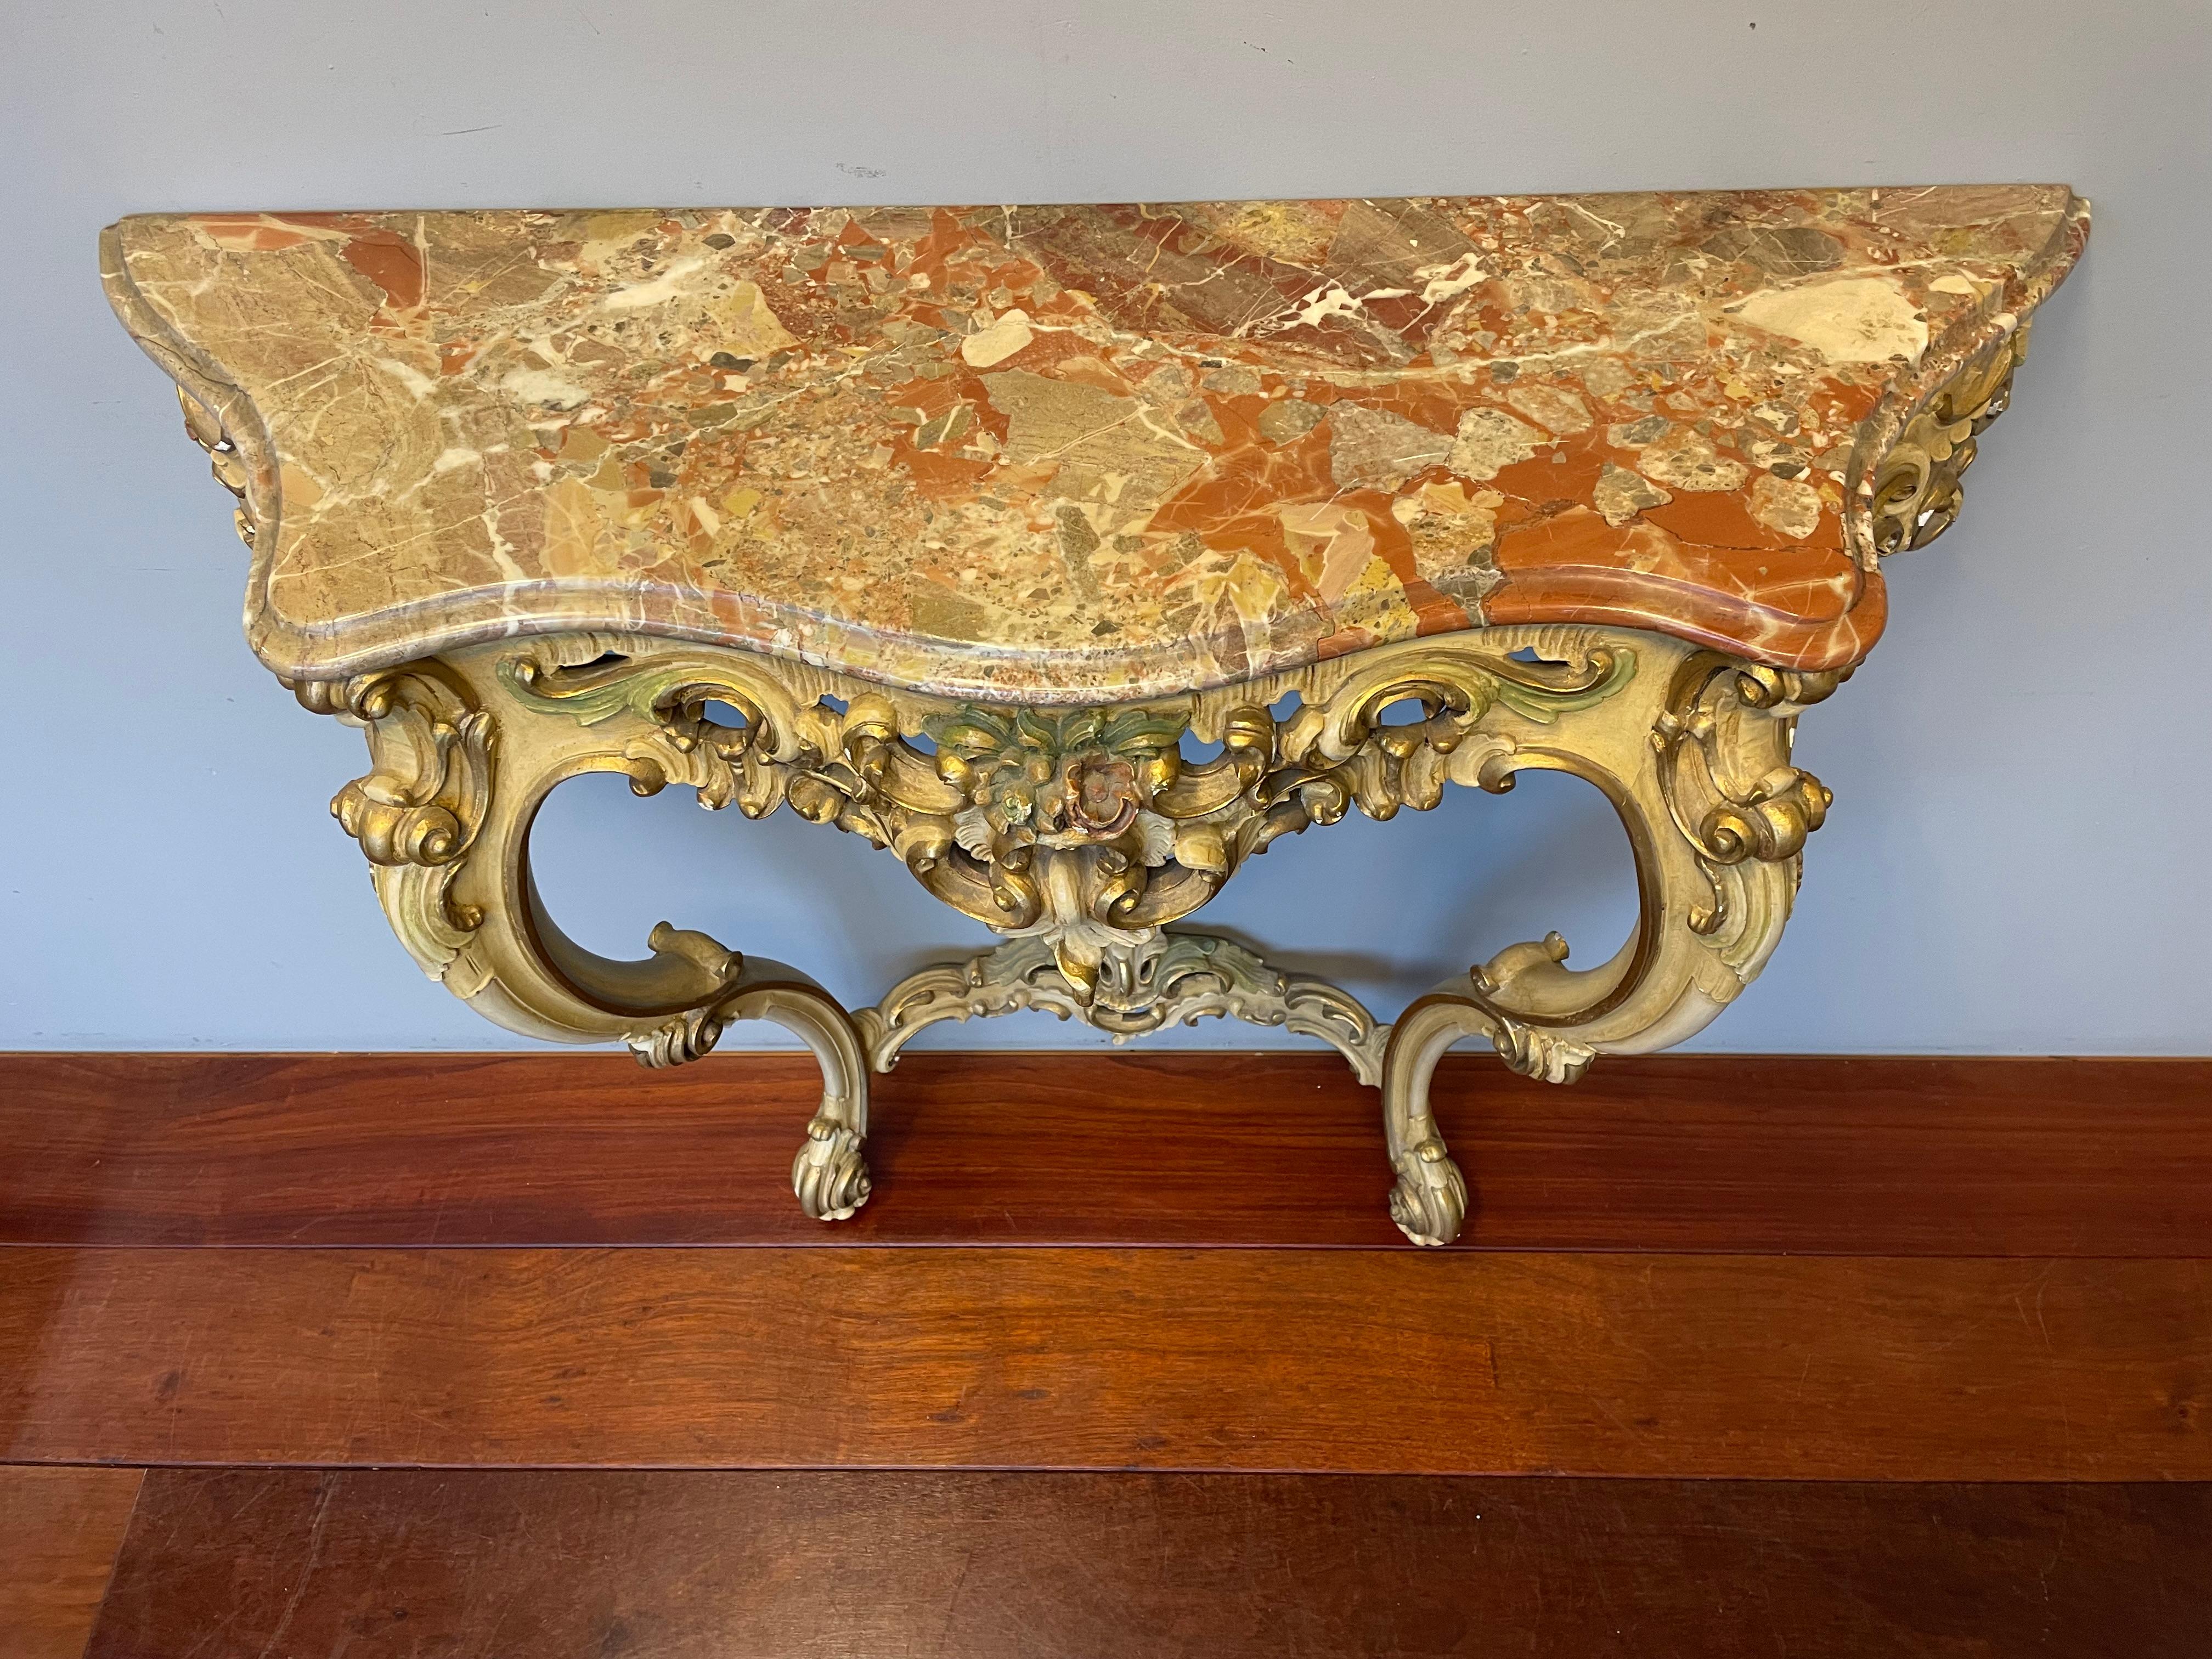 Rococo Revival Quality Carved Wooden Side Table w. Painted Floral Sculptures & Mint Marble Top For Sale